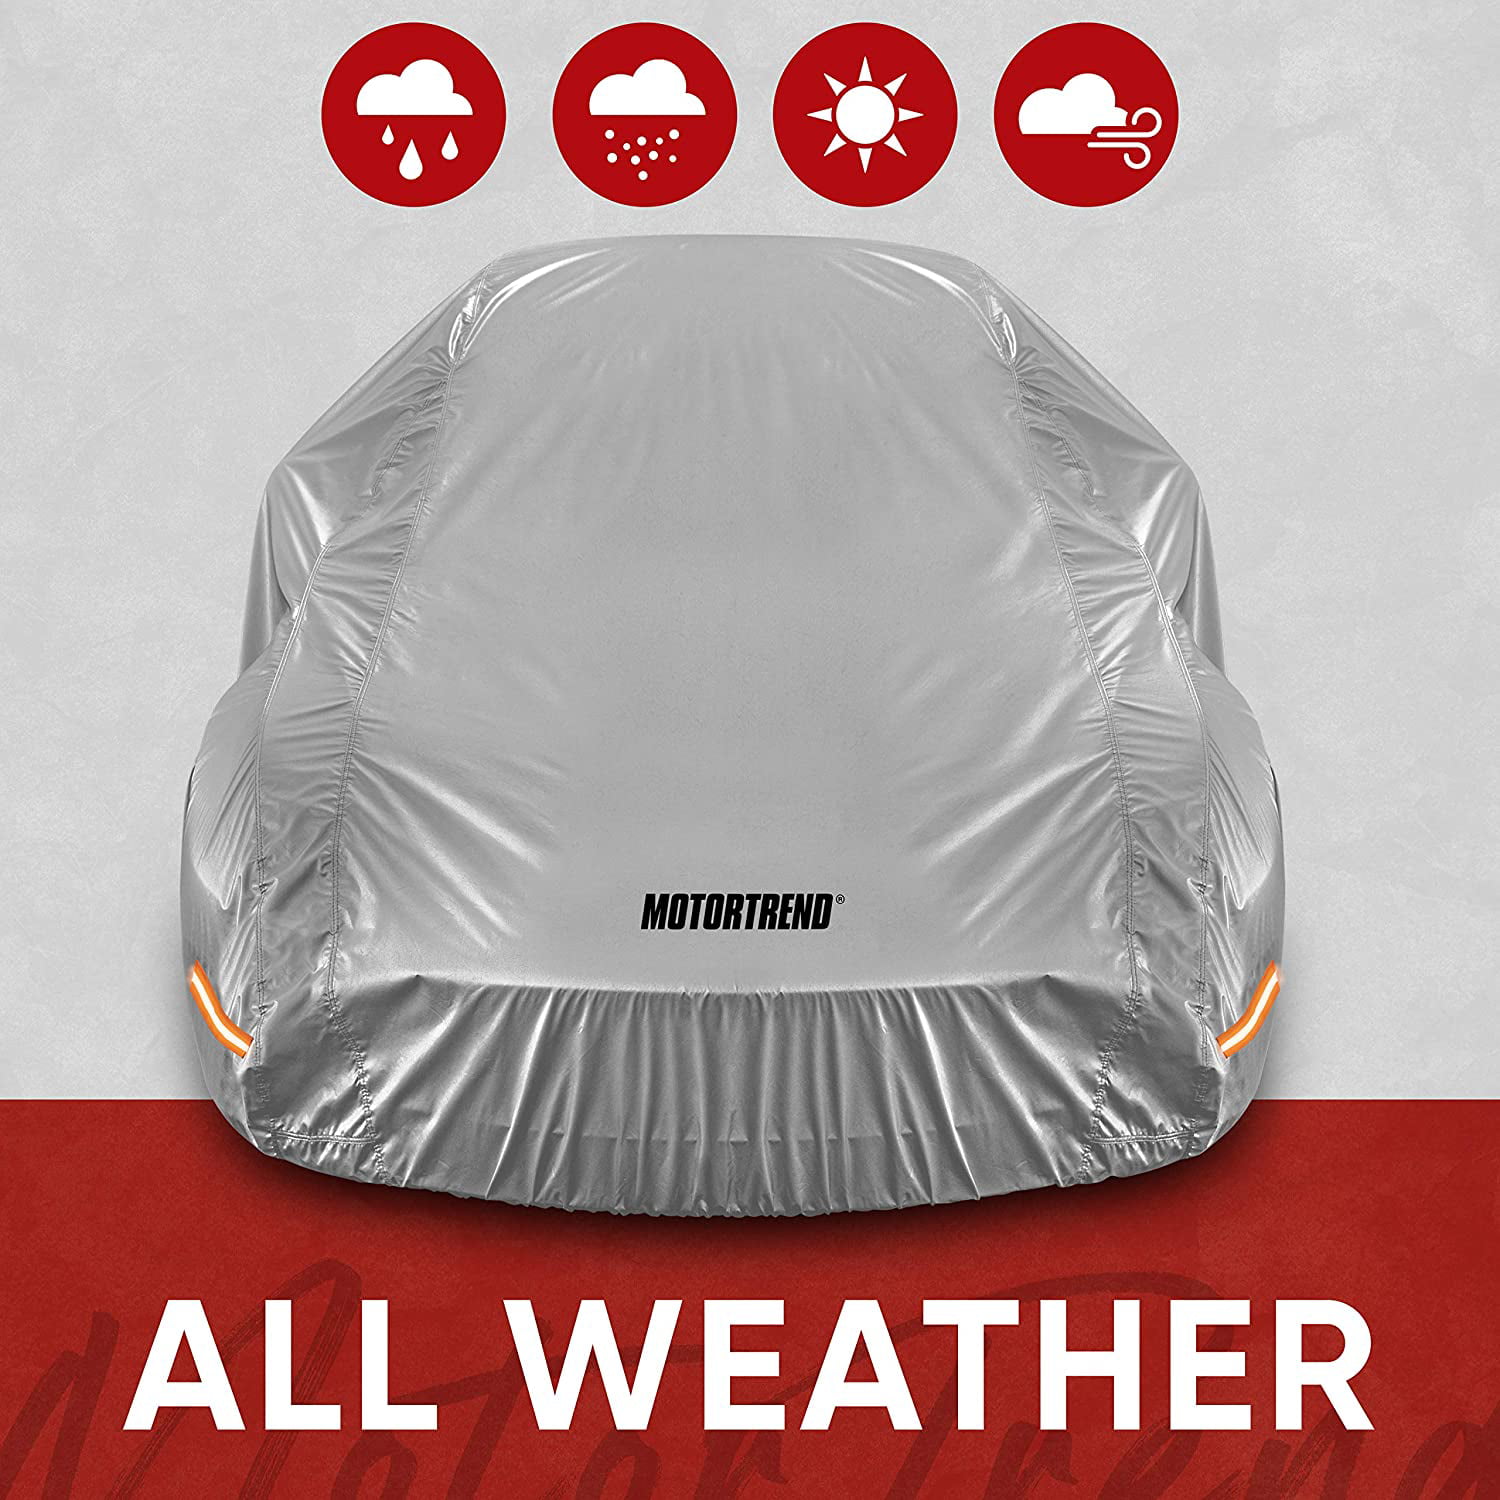 Motor Trend SafeKeeper All Weather Car Cover for Sedans Up to 190 L Waterproof 6-Layer for Outdoor Use Advanced Protection Formula OC-643N